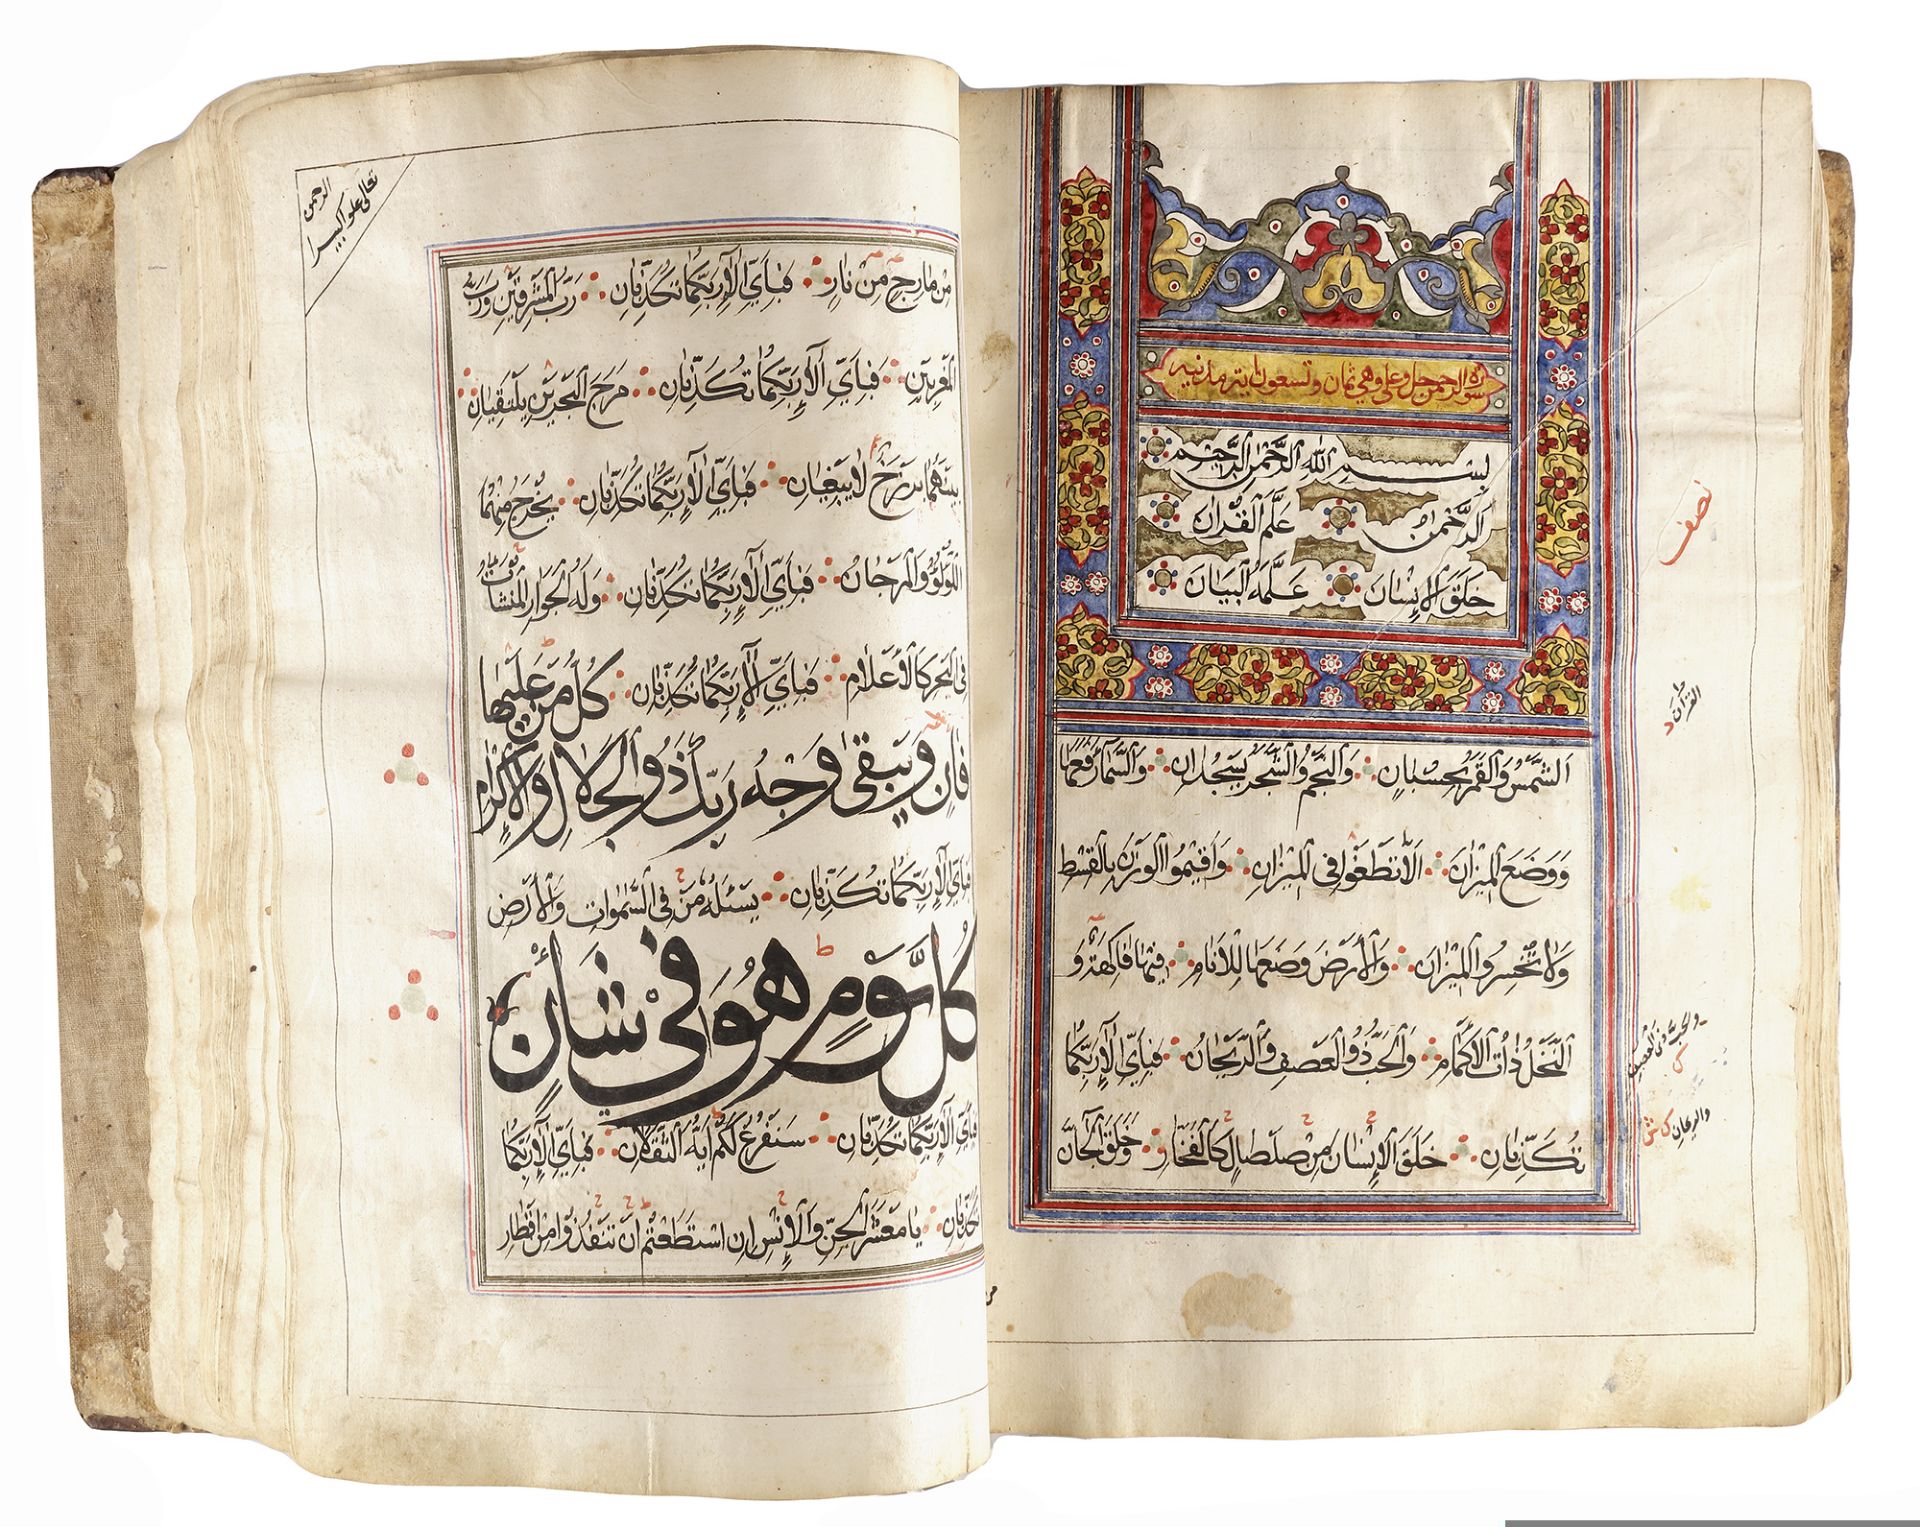 AN ILLUMINATED QURAN, YEMEN, BY AHMED QASEM IBN ISMAIL IN 1035 AH/1626 AD - Image 3 of 18